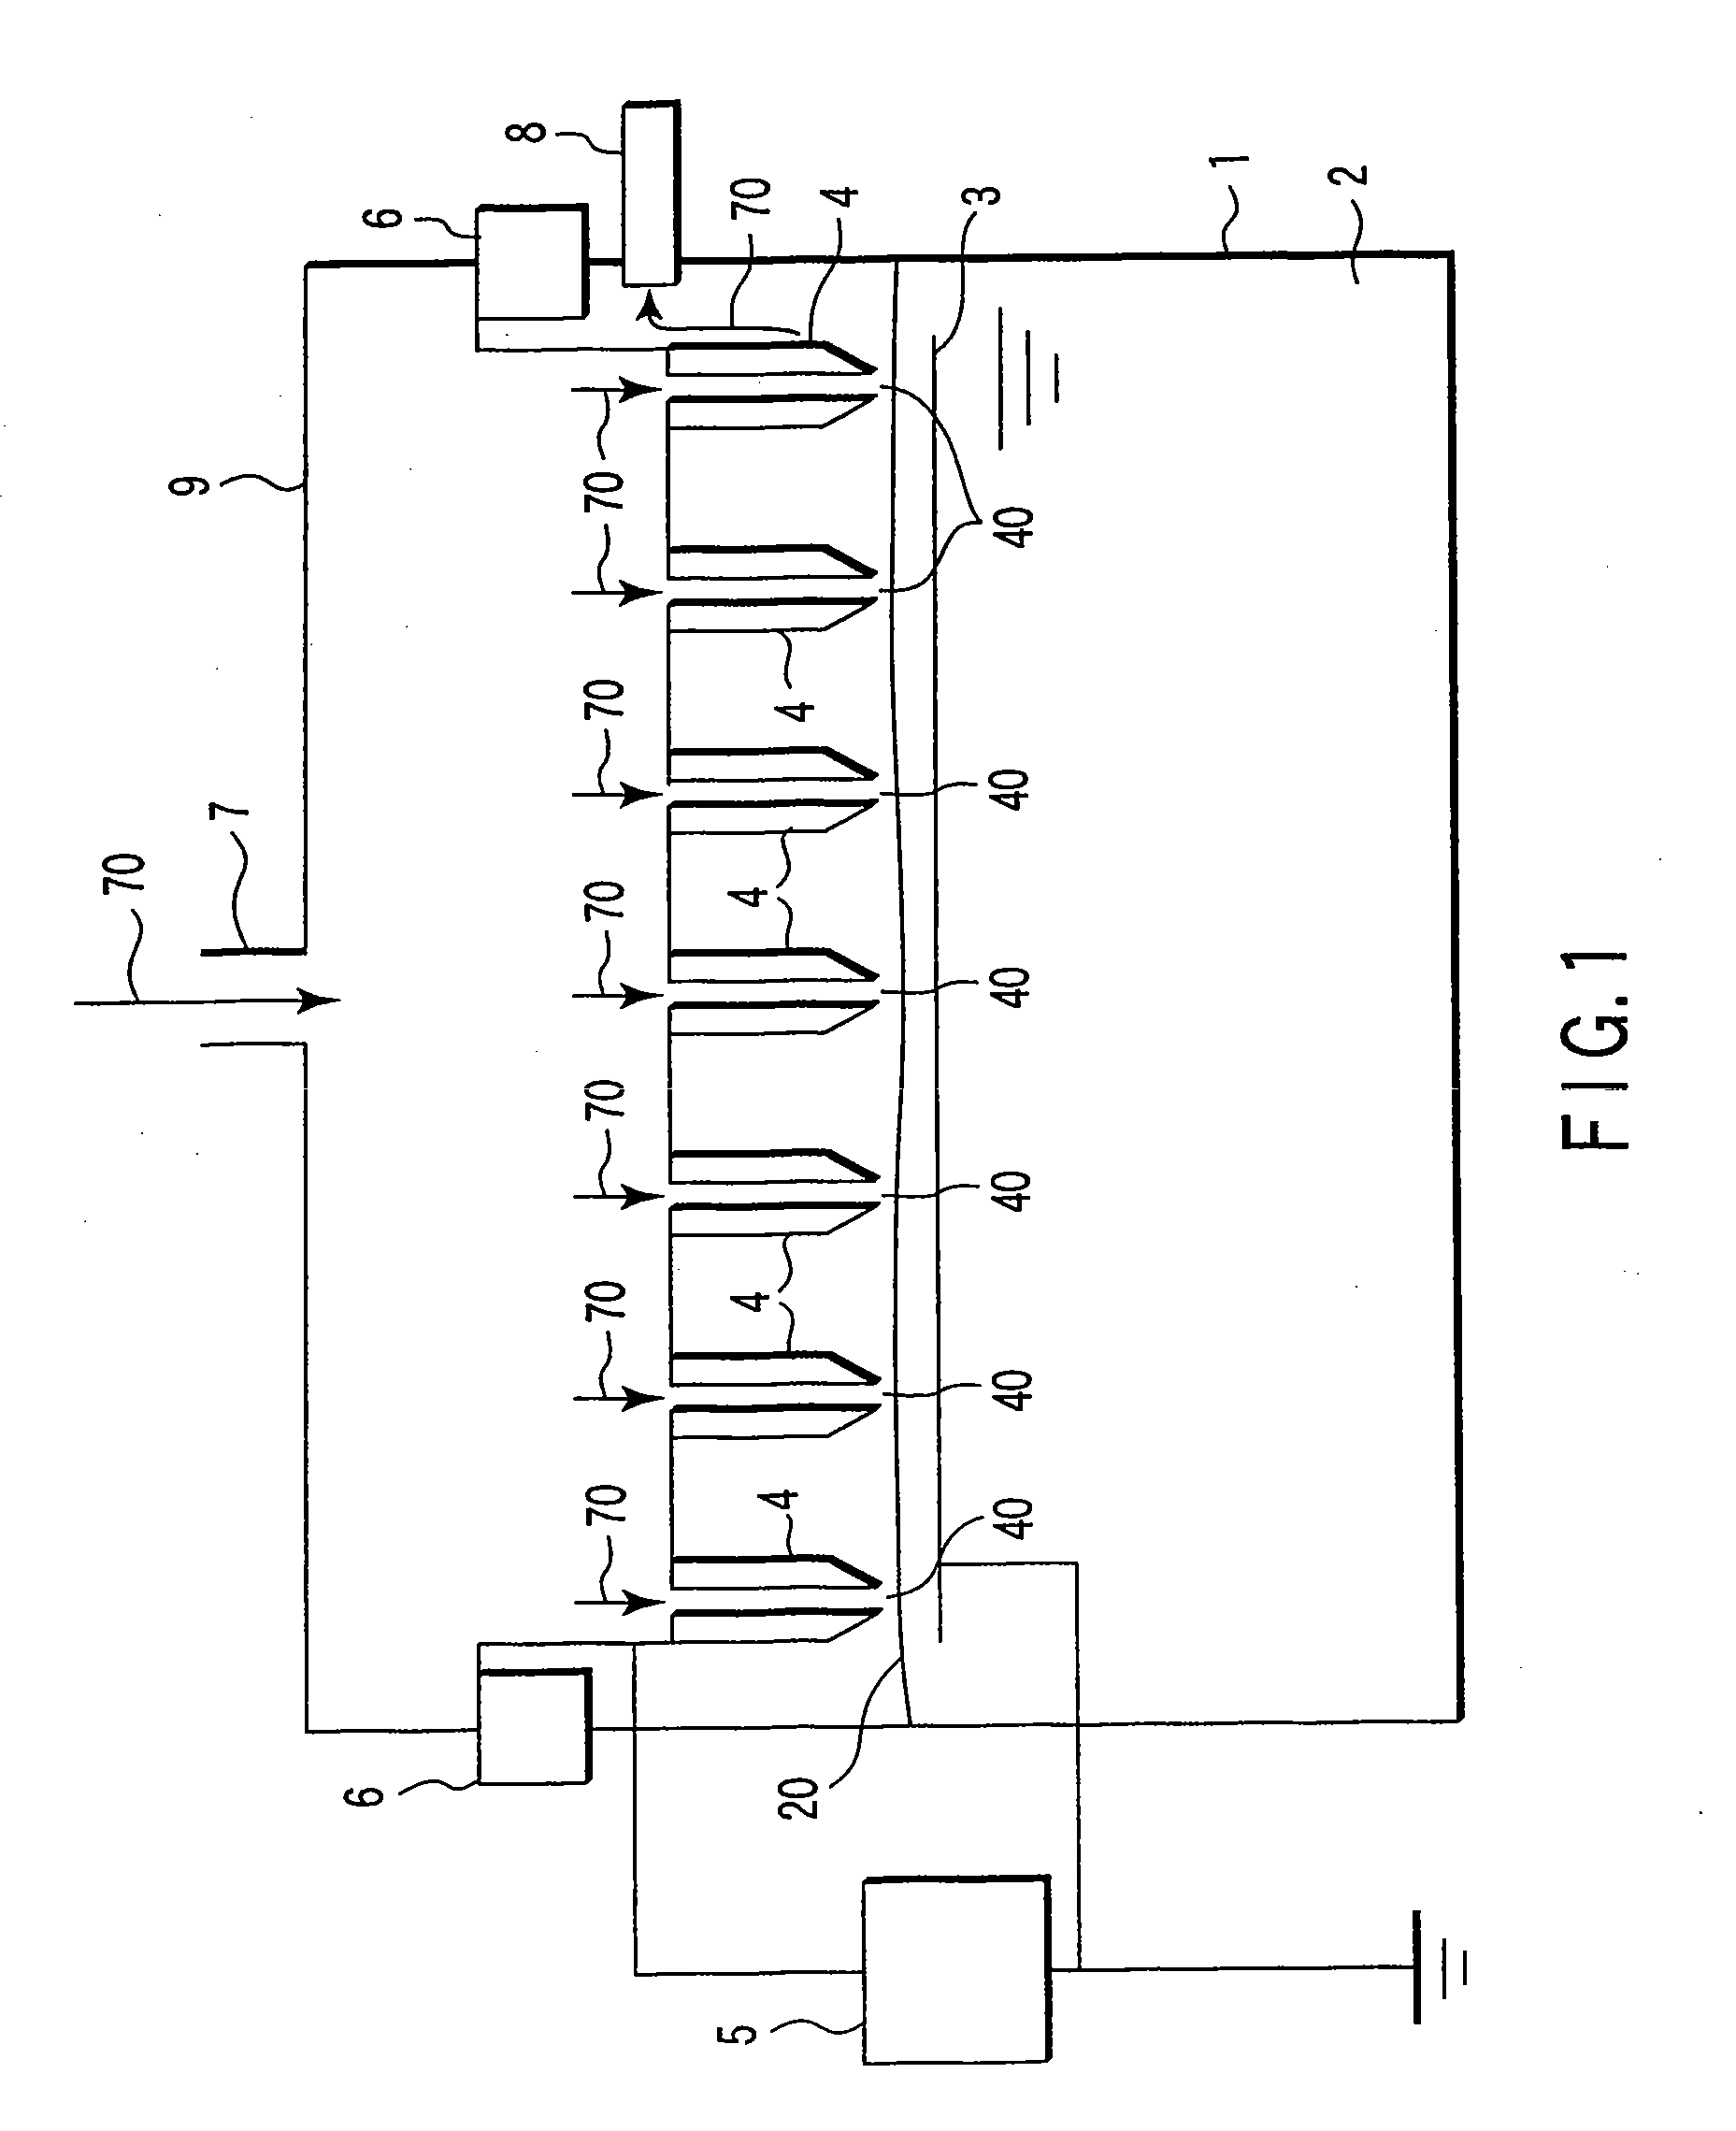 Apparatus for decomposing organic matter with radical treatment method using electric discharge